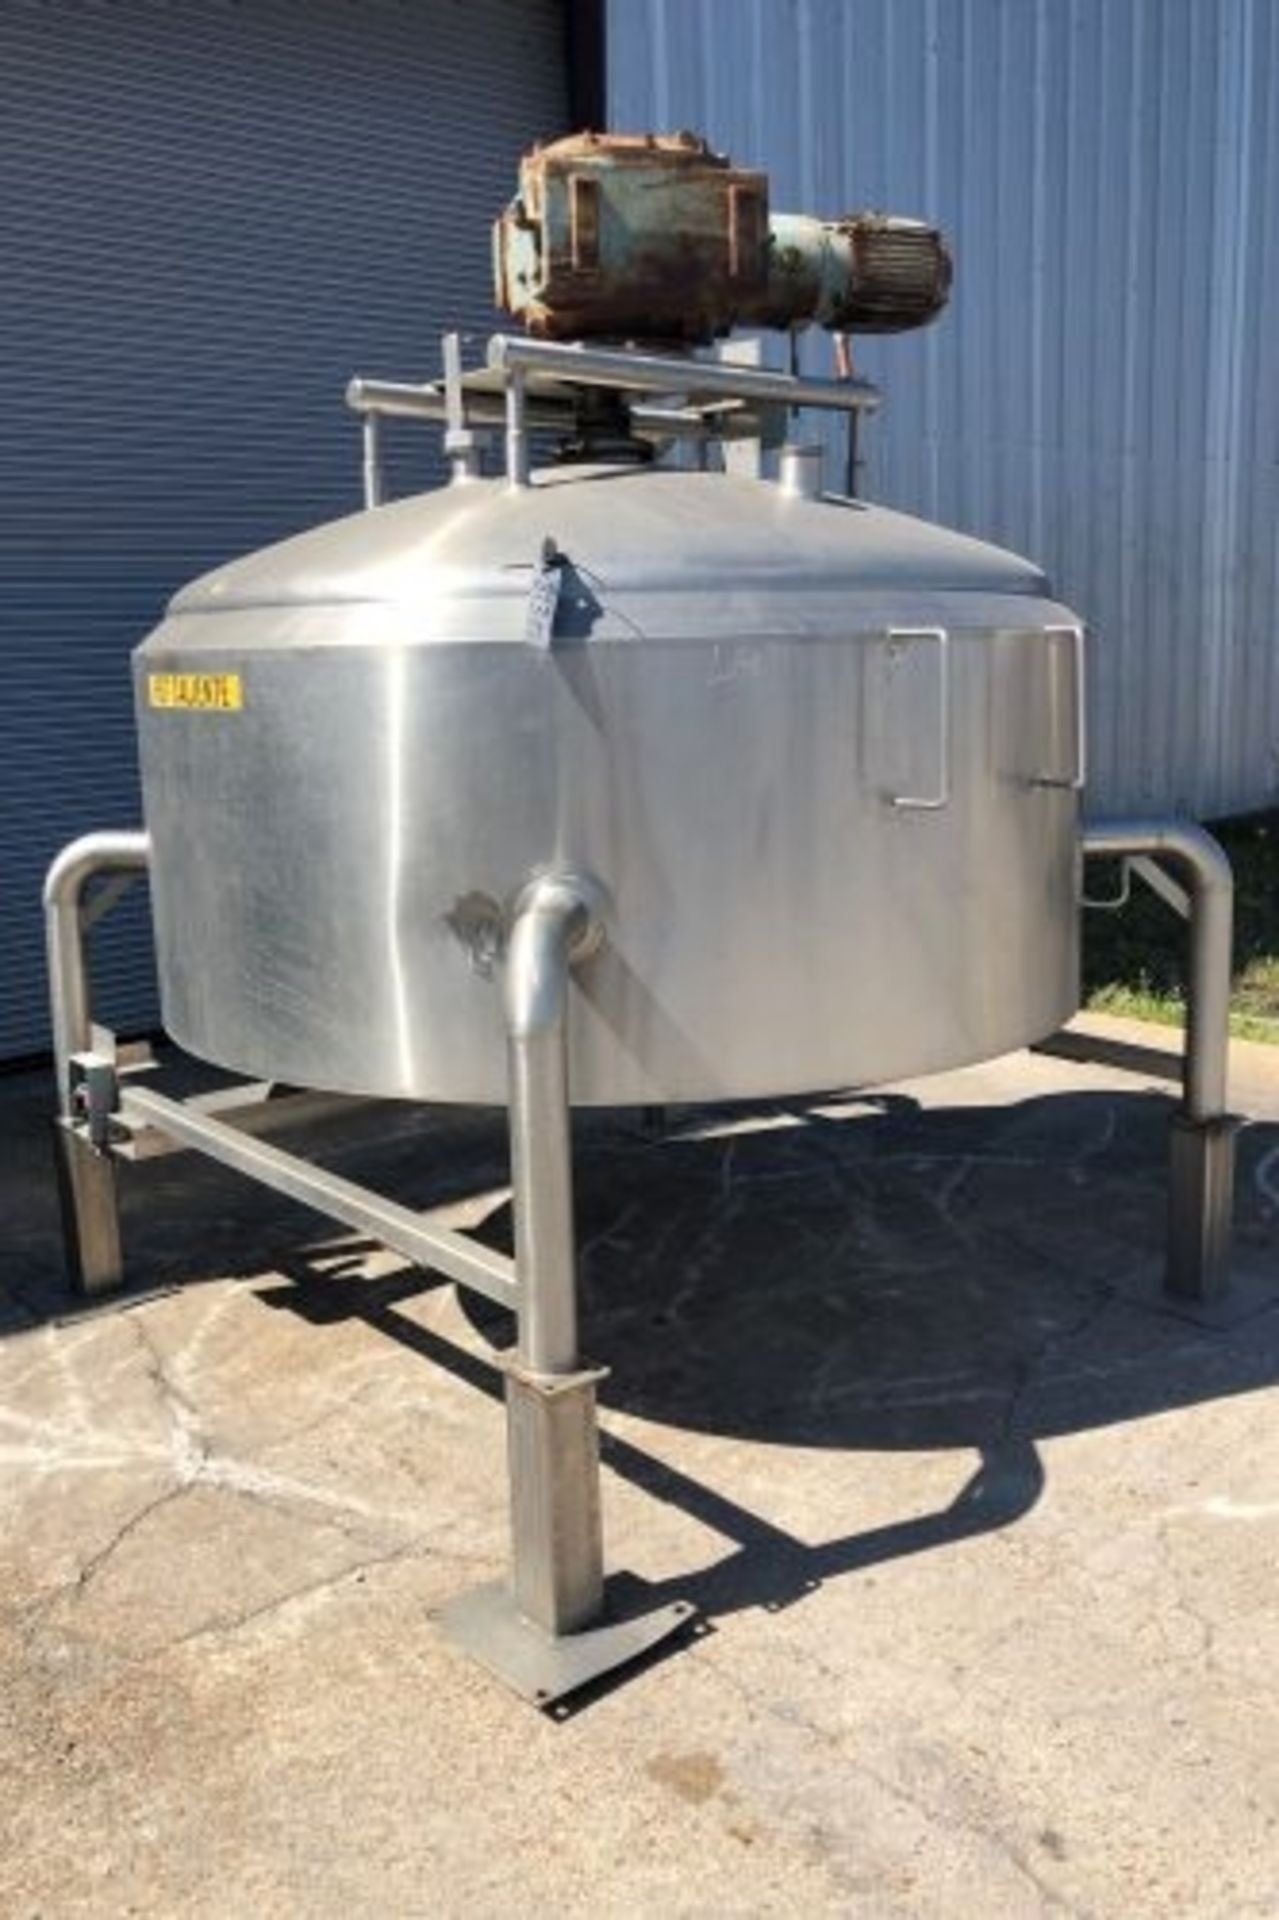 250 gallon Cherry-Burrell Int stainless steel scrape surface insulated tank